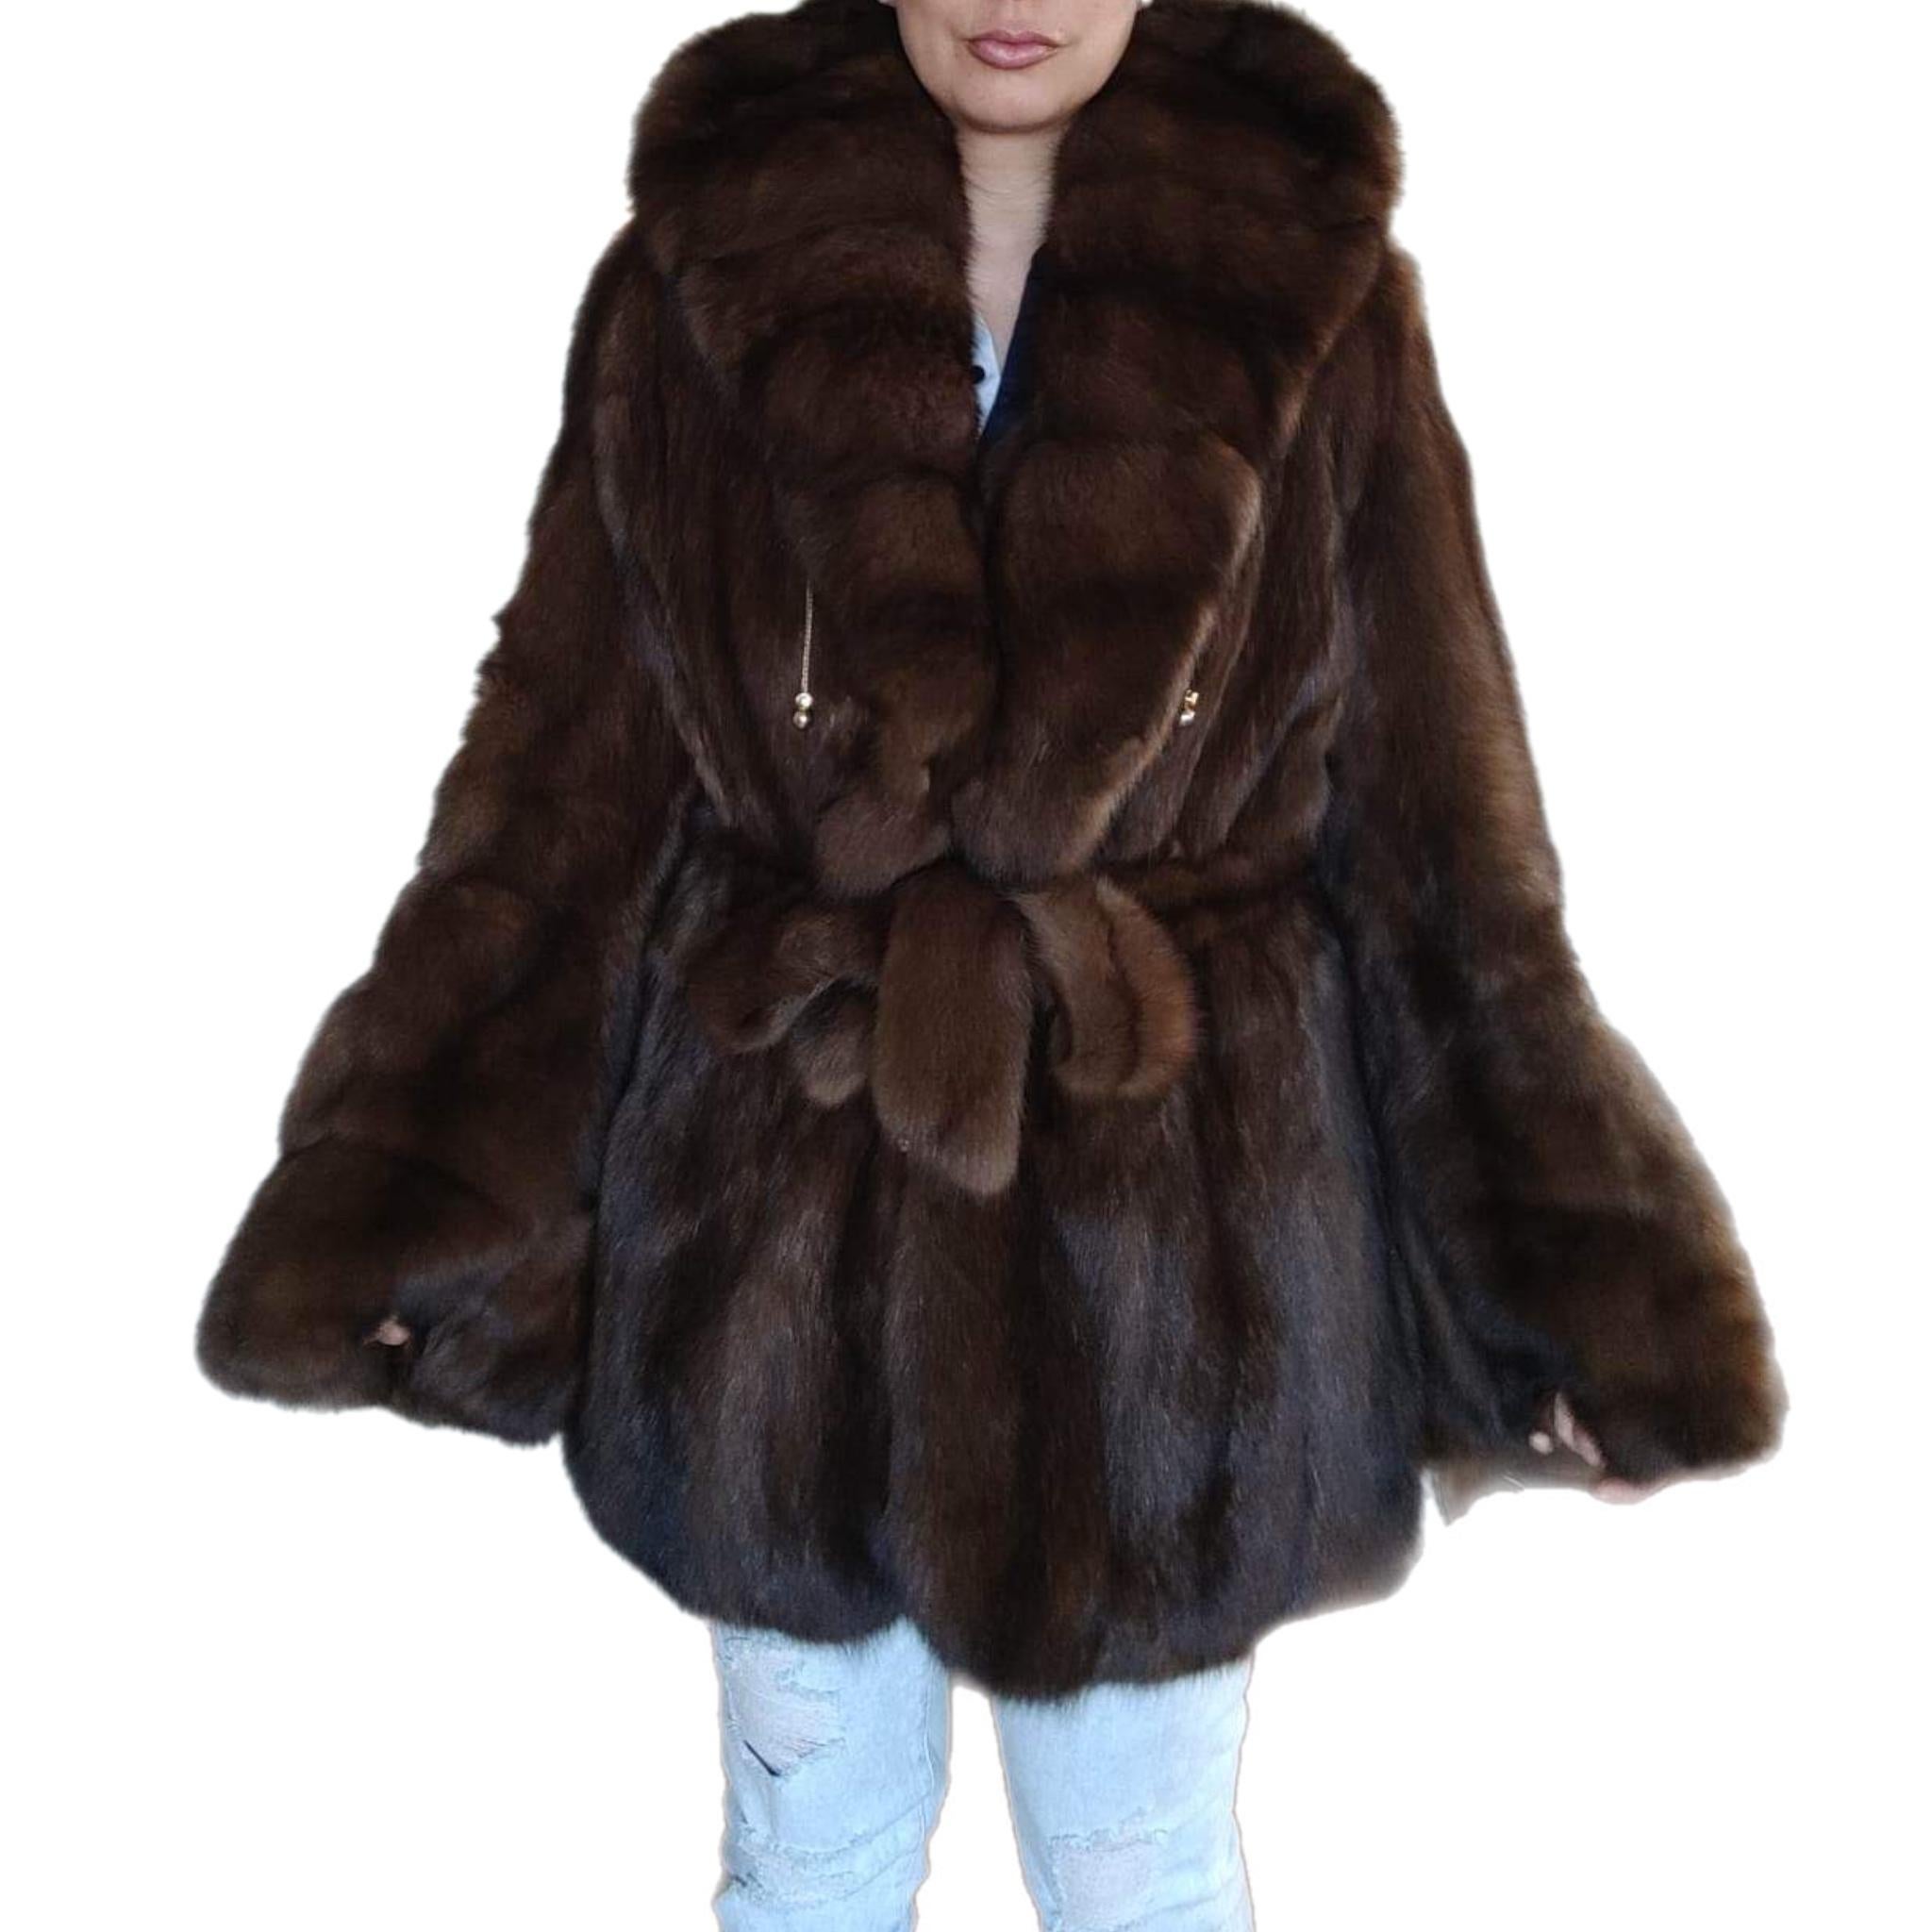 Women's Christian Dior Russian Sable fur coat size 12 tags 55000$ For Sale